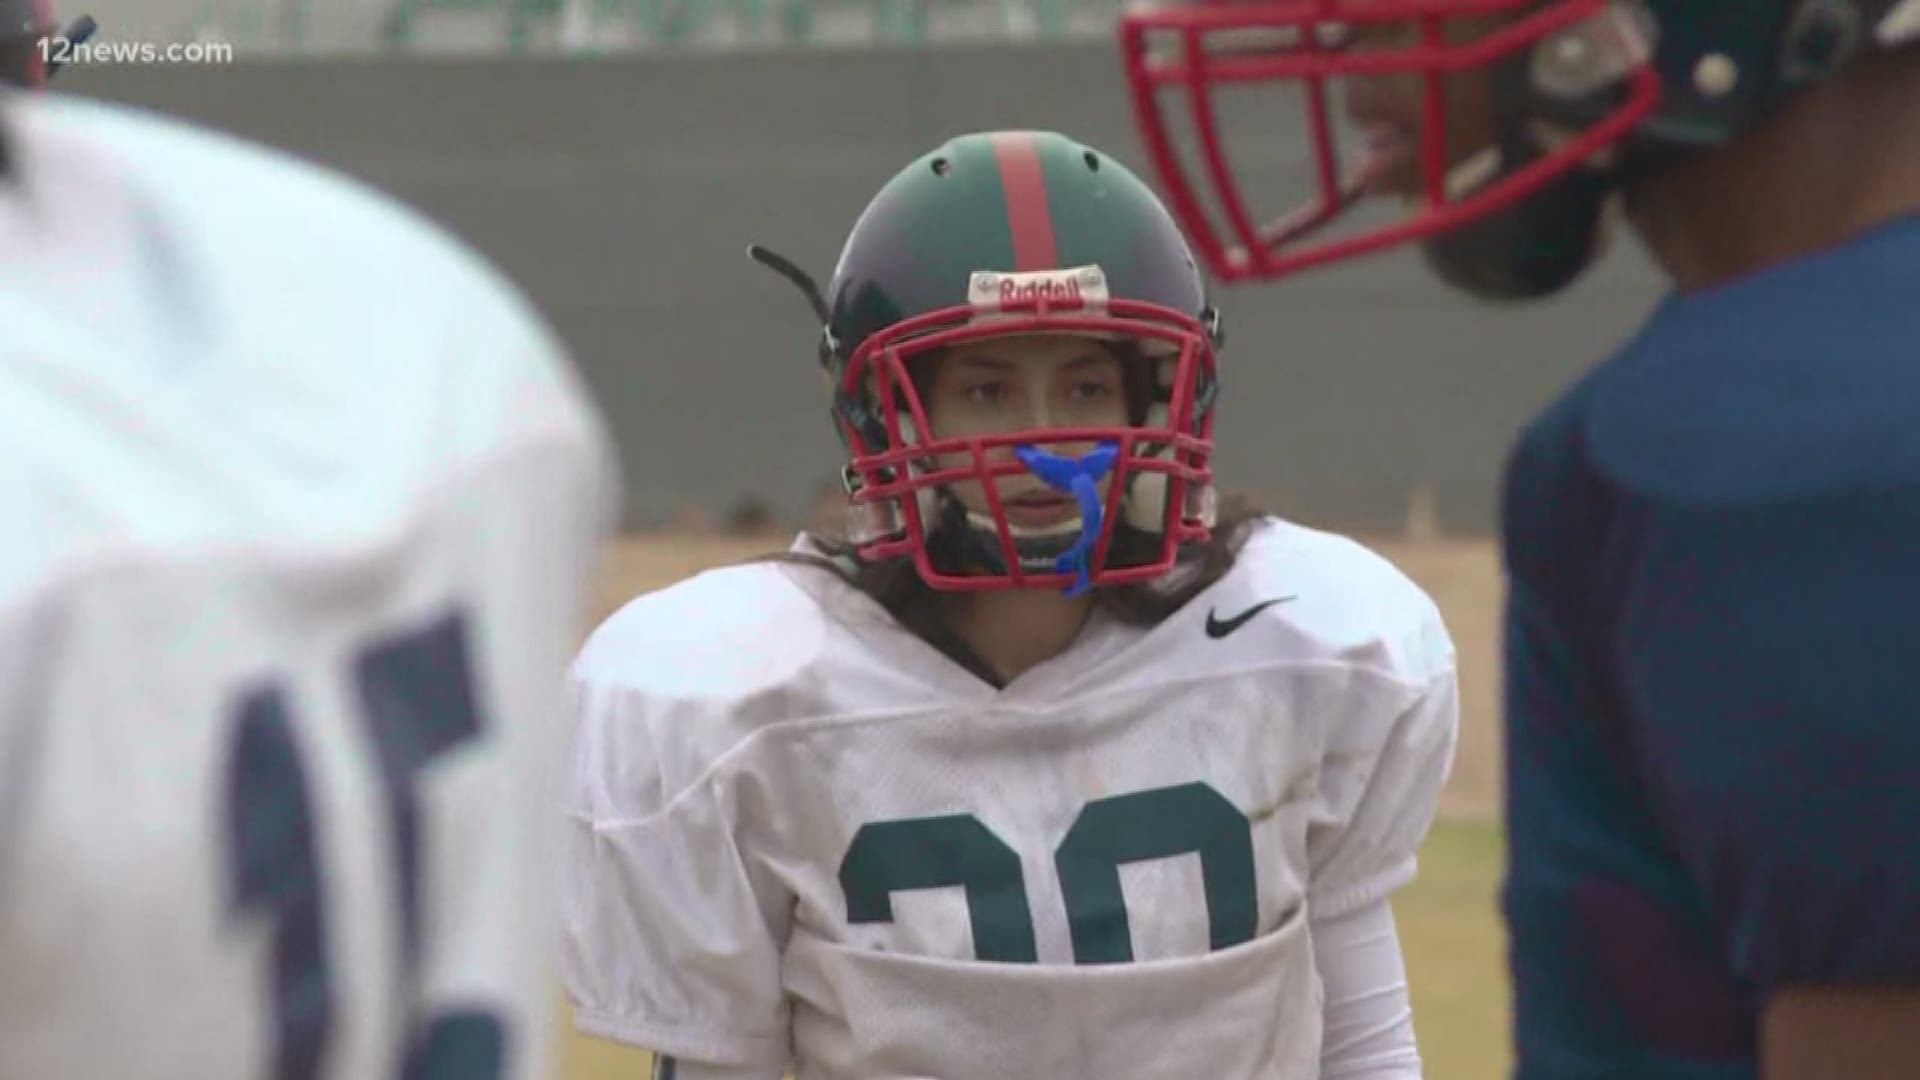 Julissa Inzalaco is a cornerback and wide receiver, seeking her dreams on the field and out of the box for women.